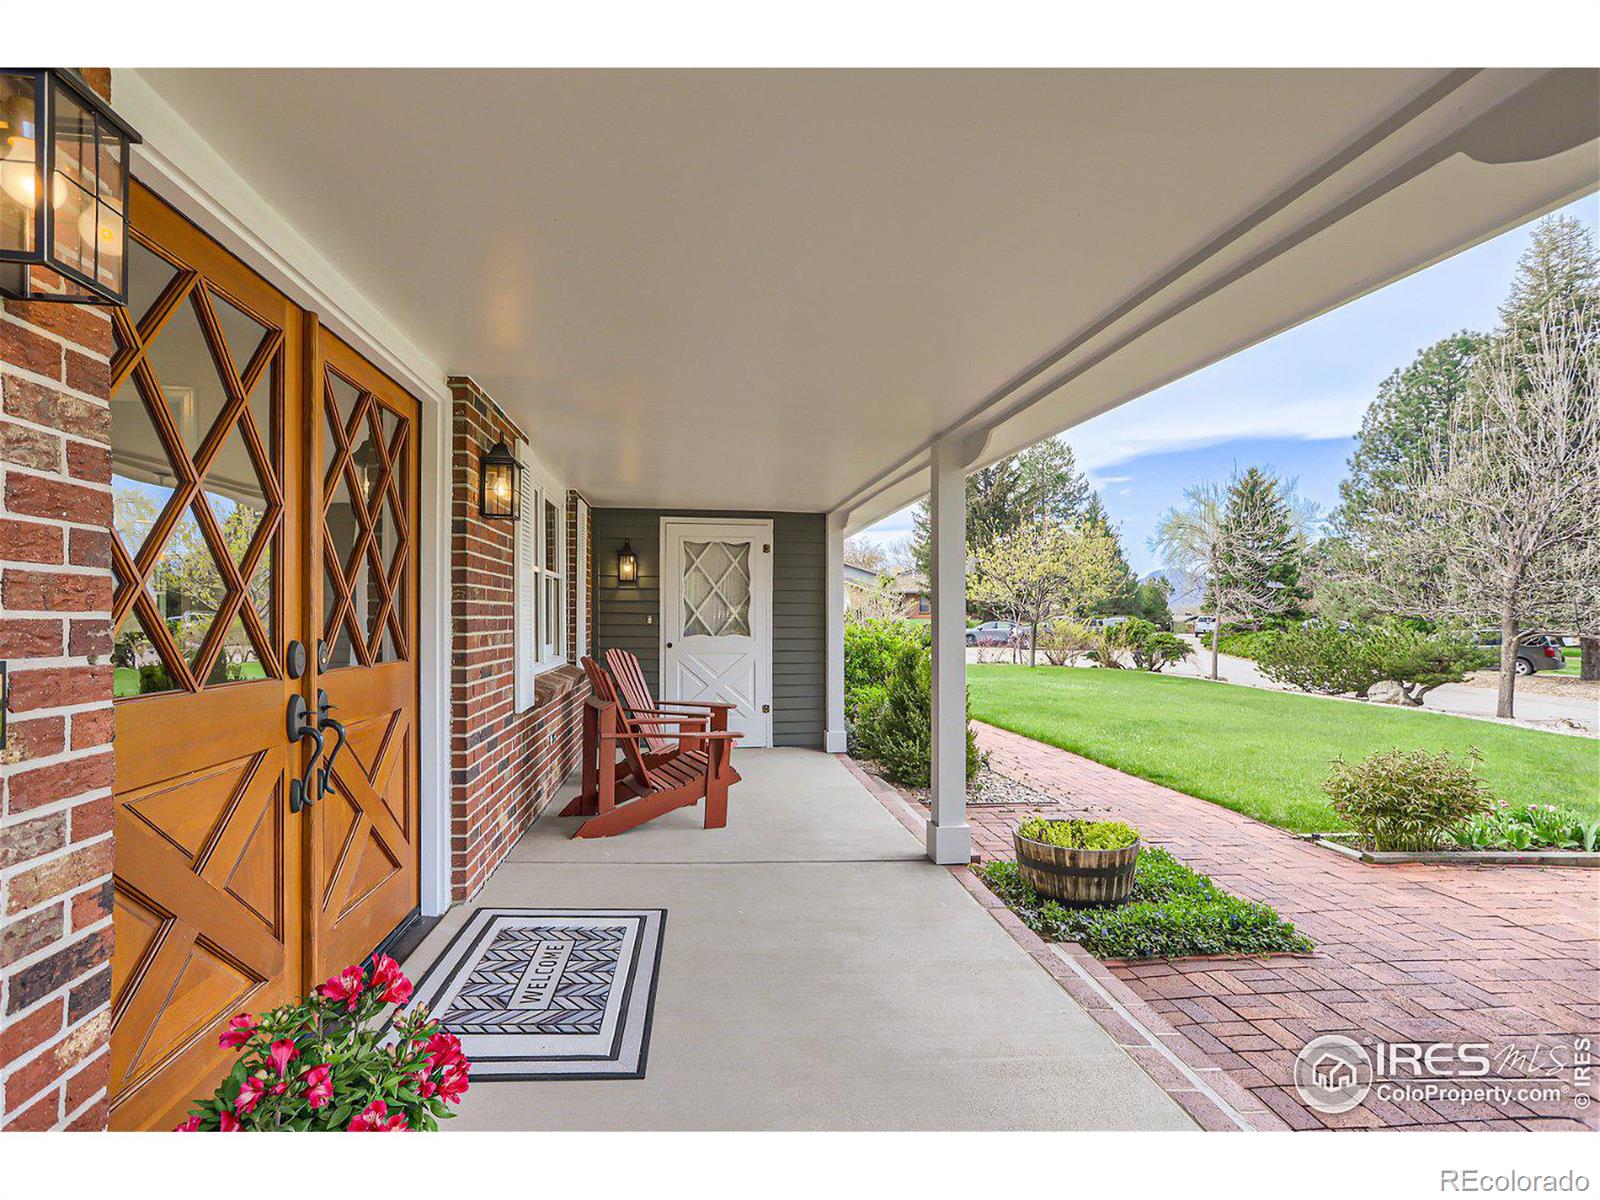 5310  Spotted Horse Trail, boulder MLS: 4567891008665 Beds: 4 Baths: 4 Price: $1,495,000